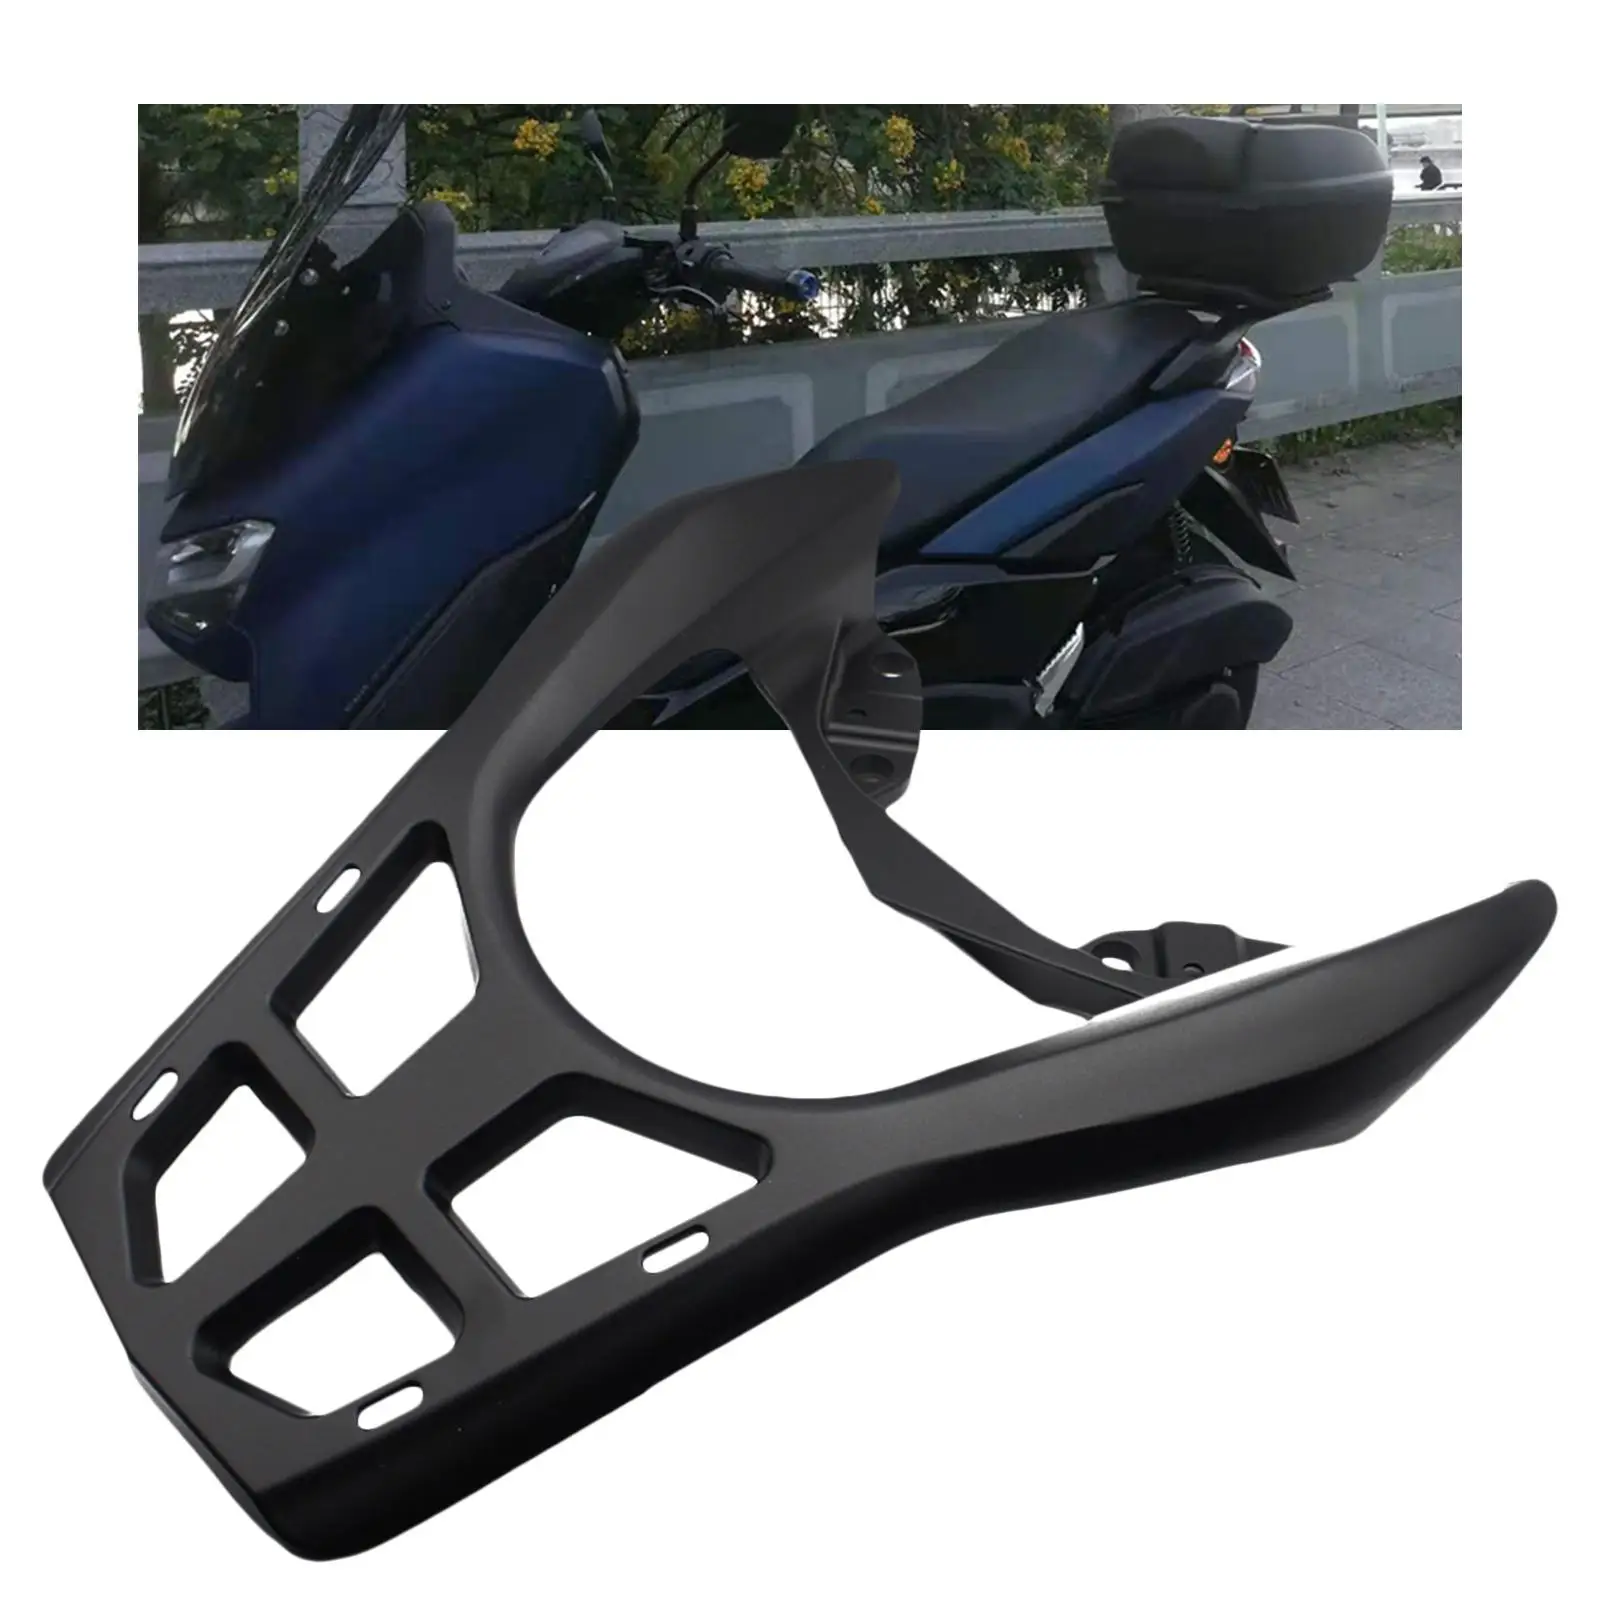 Motorcycle Rear Luggage Rack for  Nmax 155 Accessories Parts